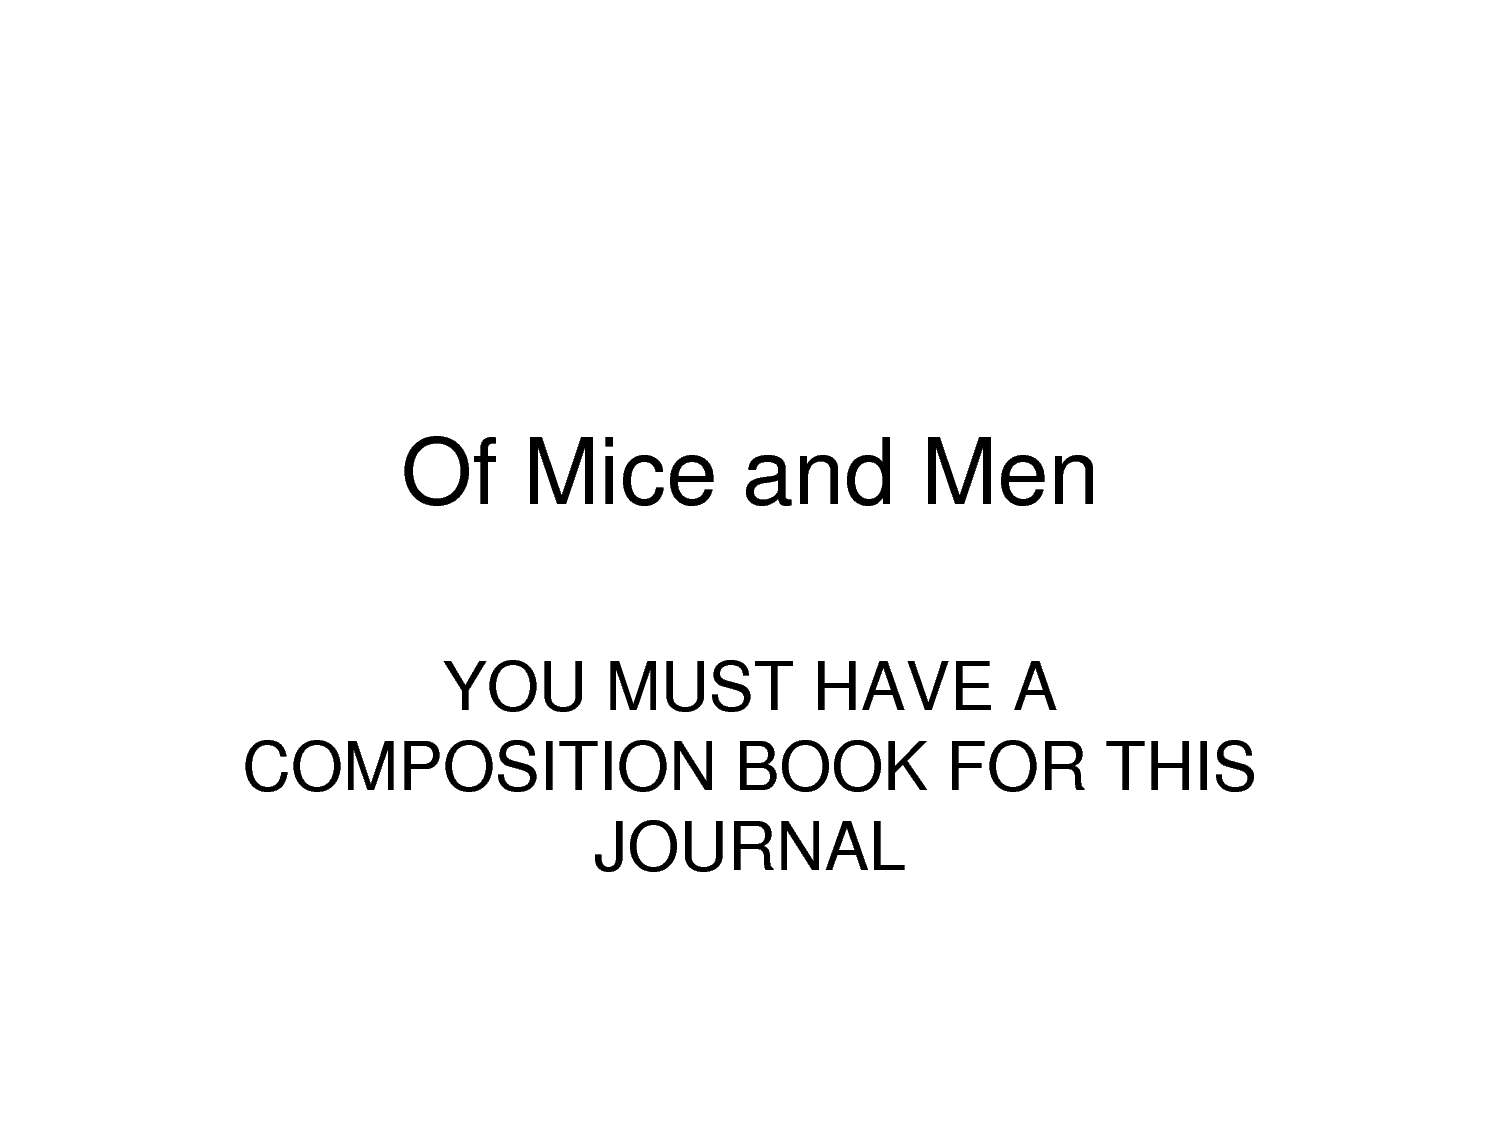 Of Mice And Men Book Quotes About Friendship. QuotesGram